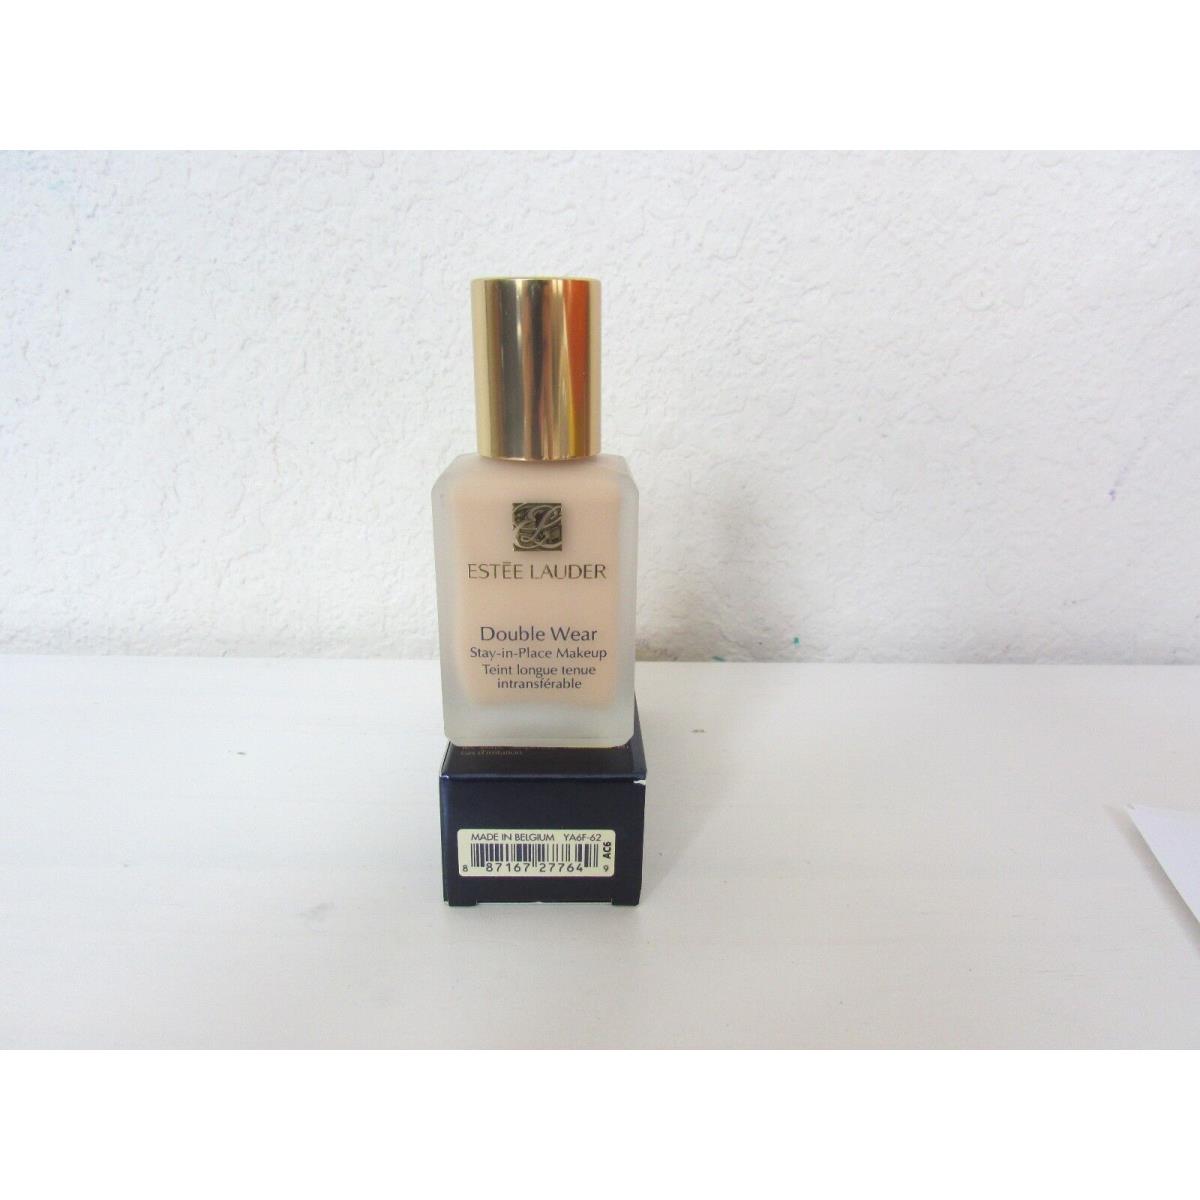 Estee Lauder Double Wear Stay-in-place Makeup Choose Your Shade 1.0 Oz/30 ml 2C0 Cool Vanilla